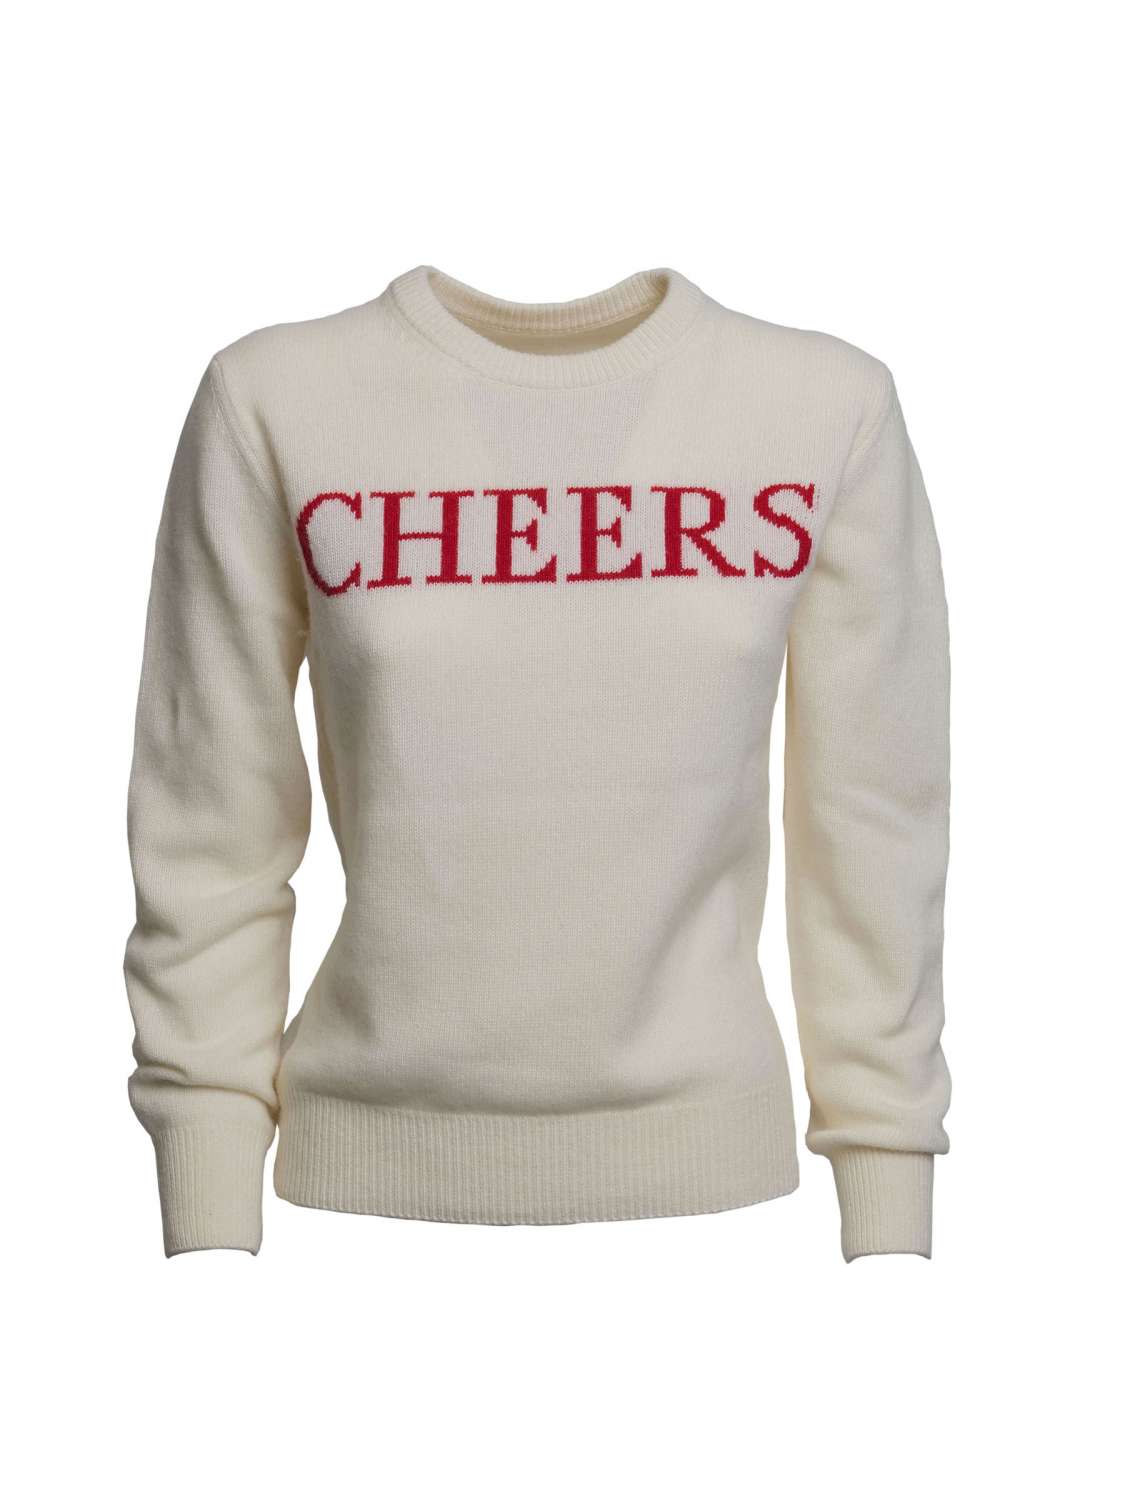 "CHEERS" Cashmere Wool Sweater